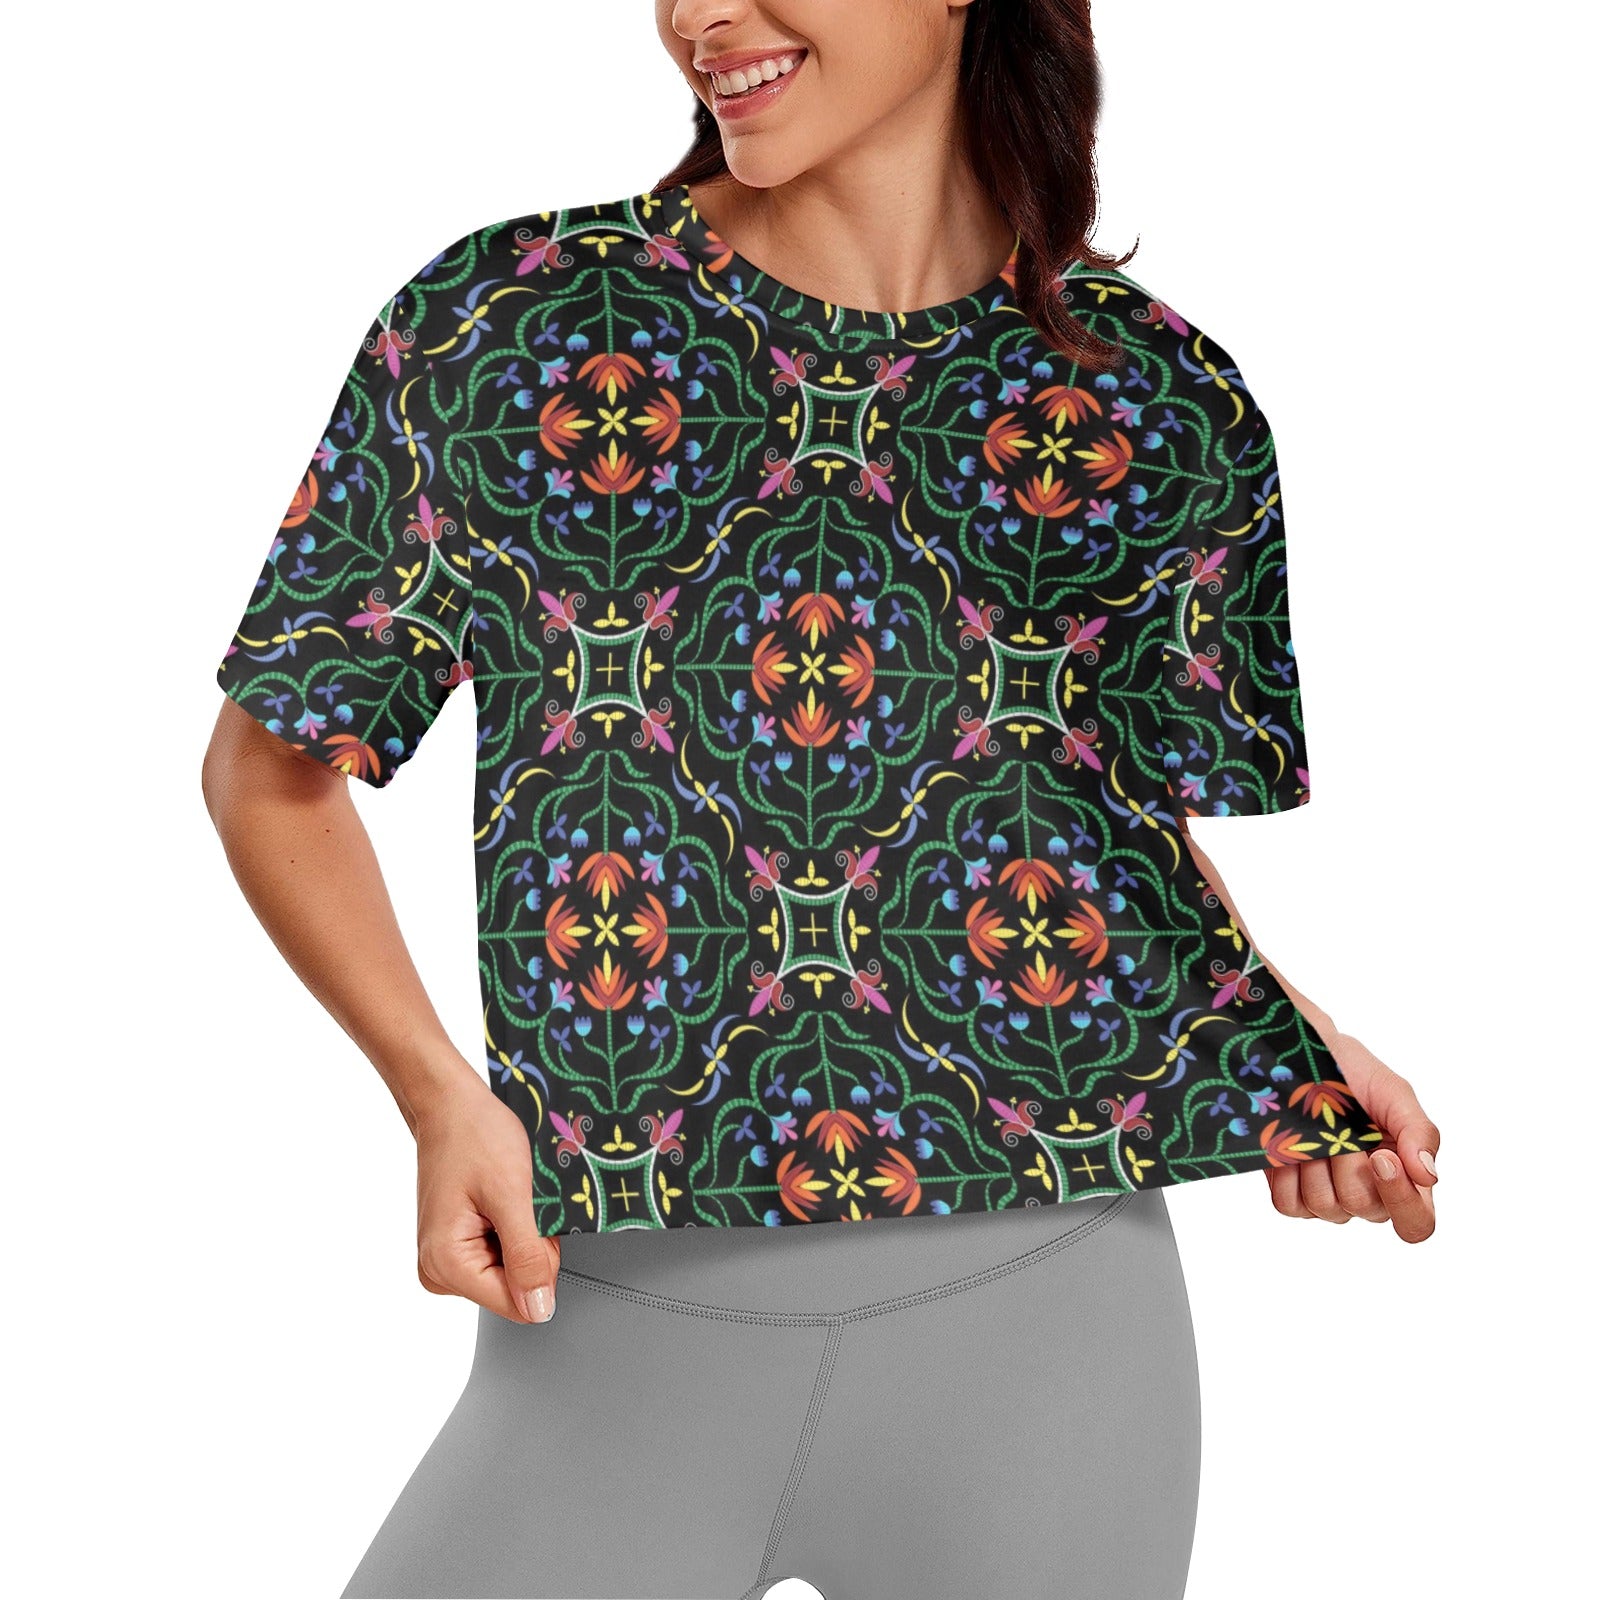 Quill Visions Women's Cropped T-shirt